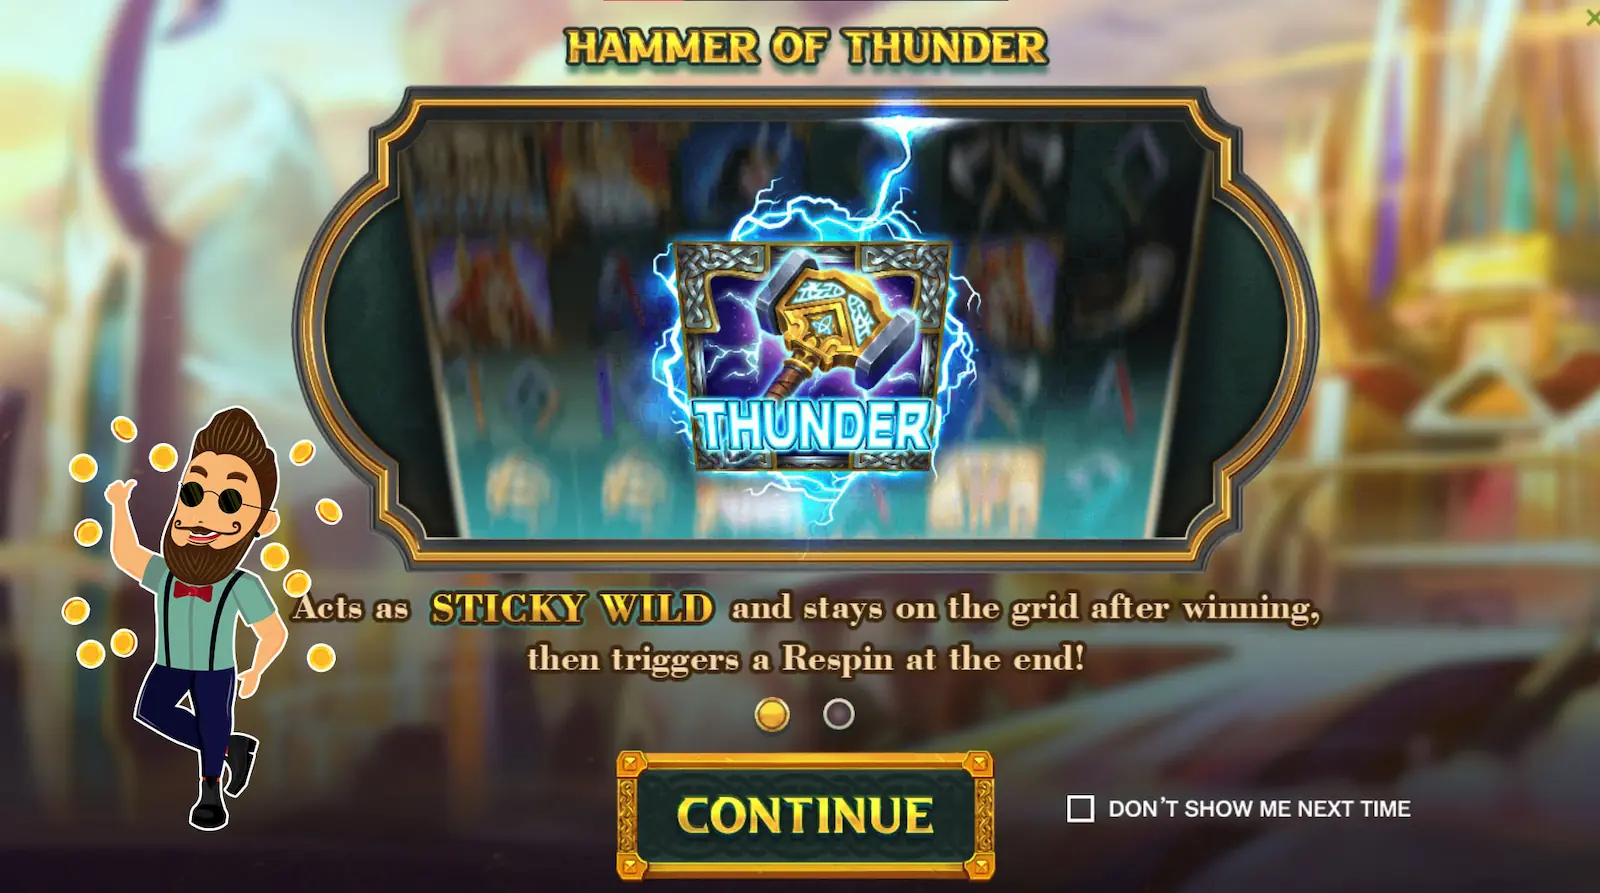 Hammer of Thunder Respin Feature